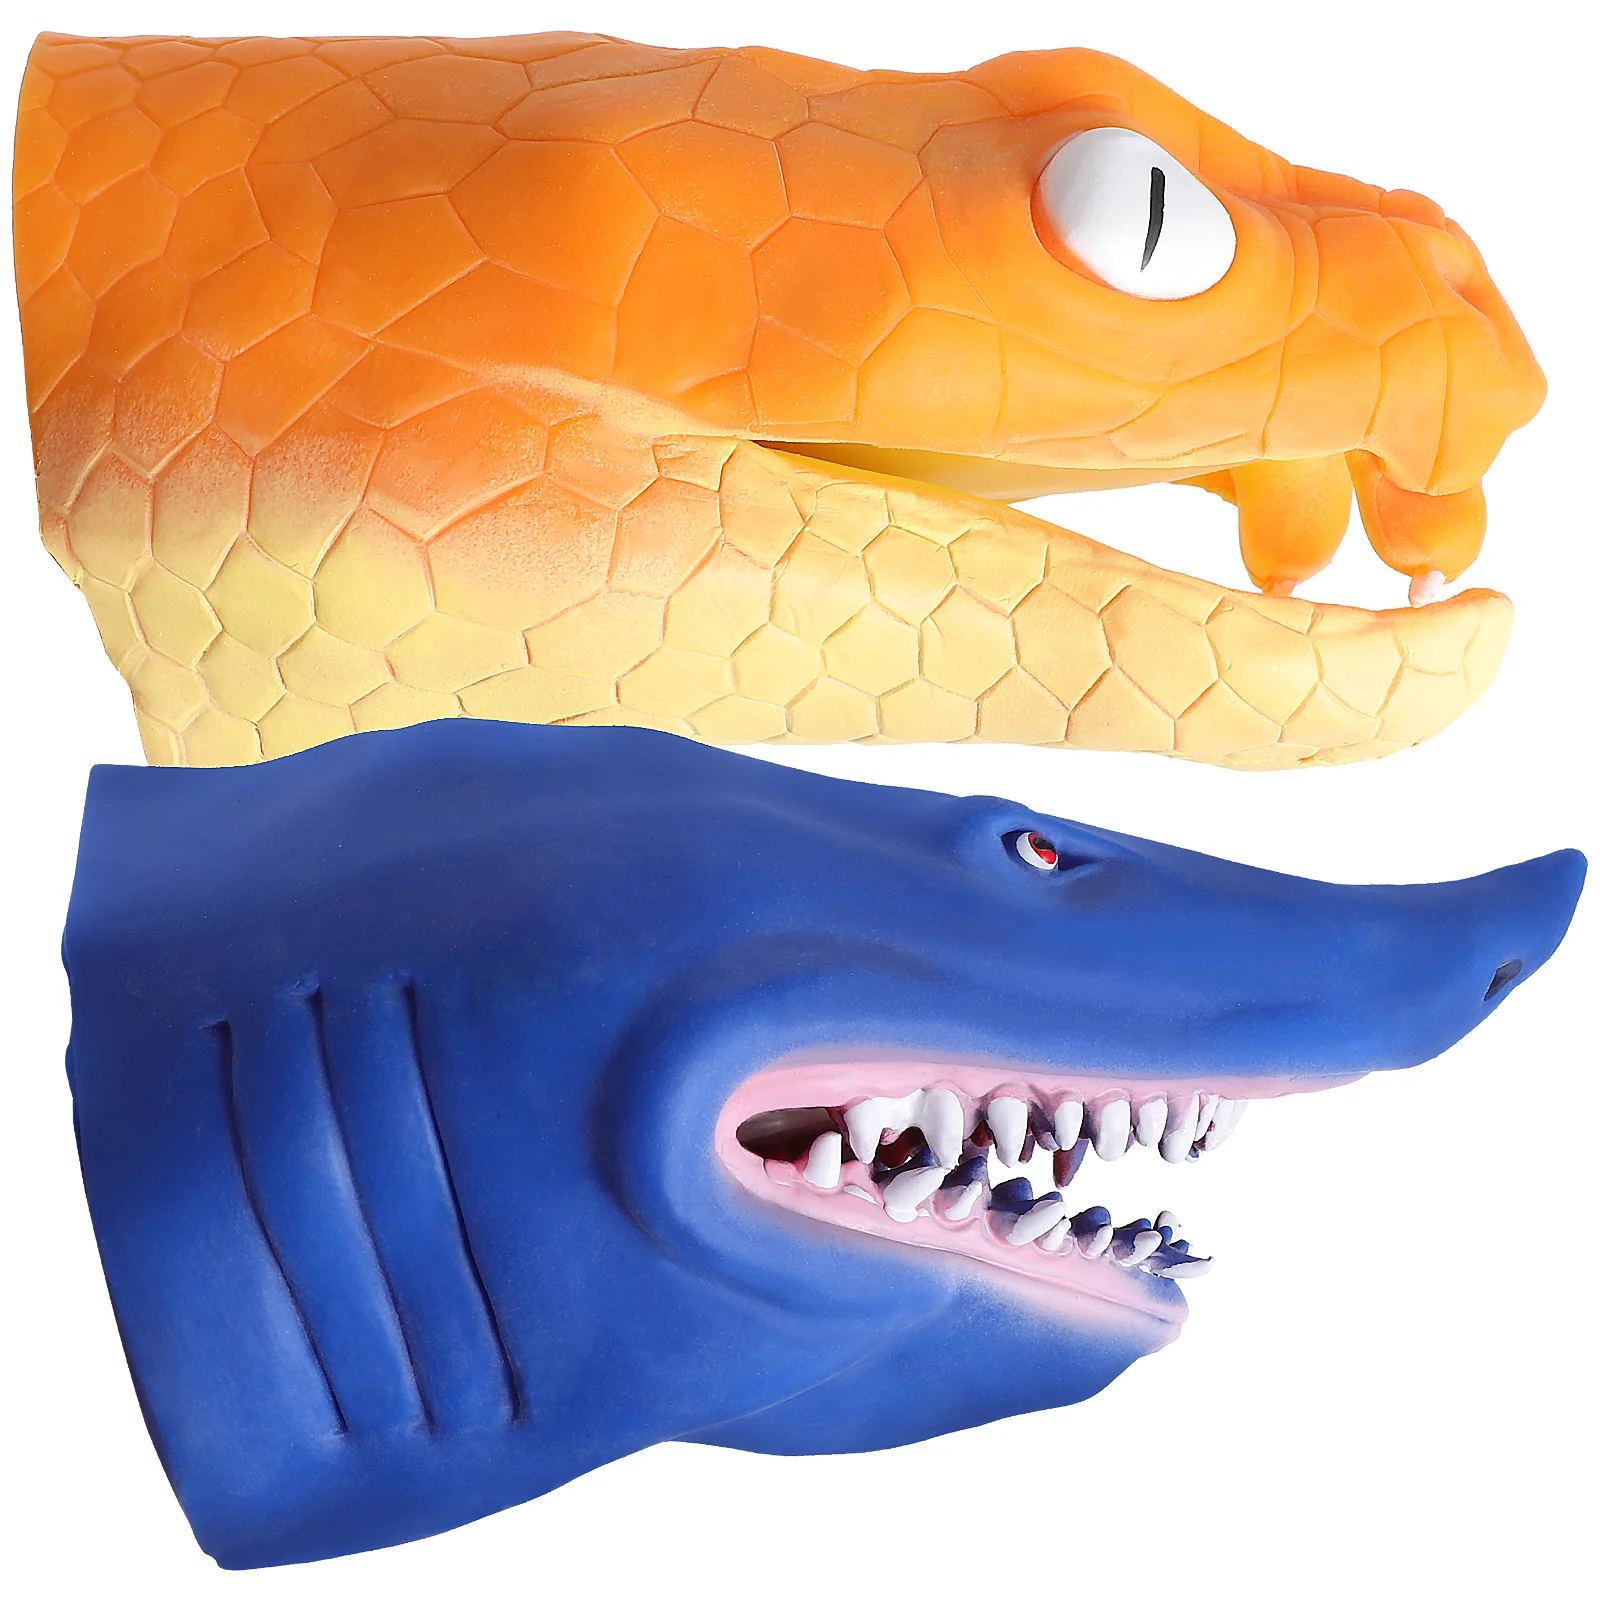 

Kids Toys Kids Toys 2 Pcs Animal Hand Puppet Head Puppets Role Play Toy Realistic Orange Snake Storytelling Props Ocean Sea